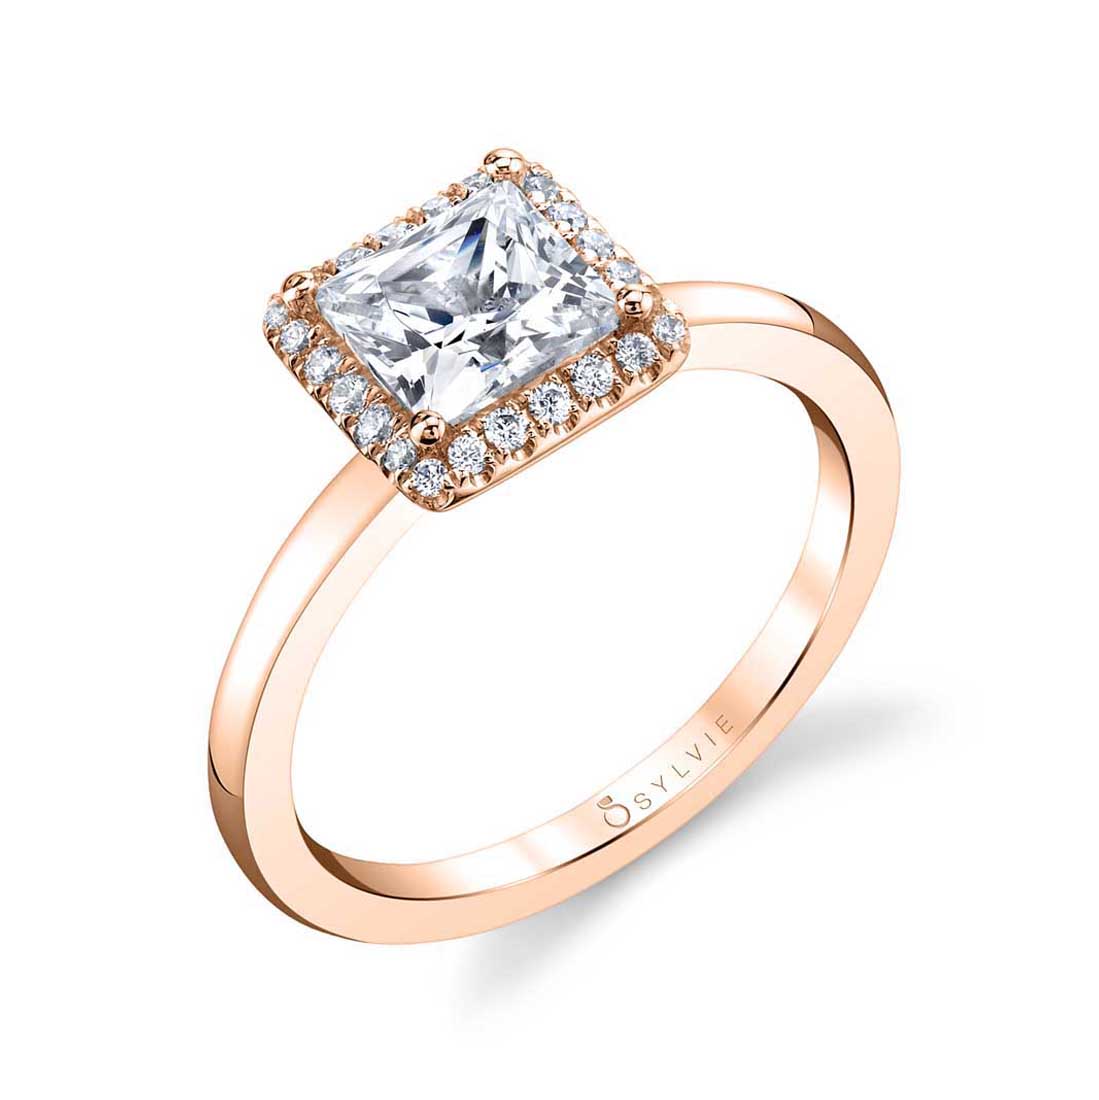 Modern Princess Cut Engagement Ring with Halo